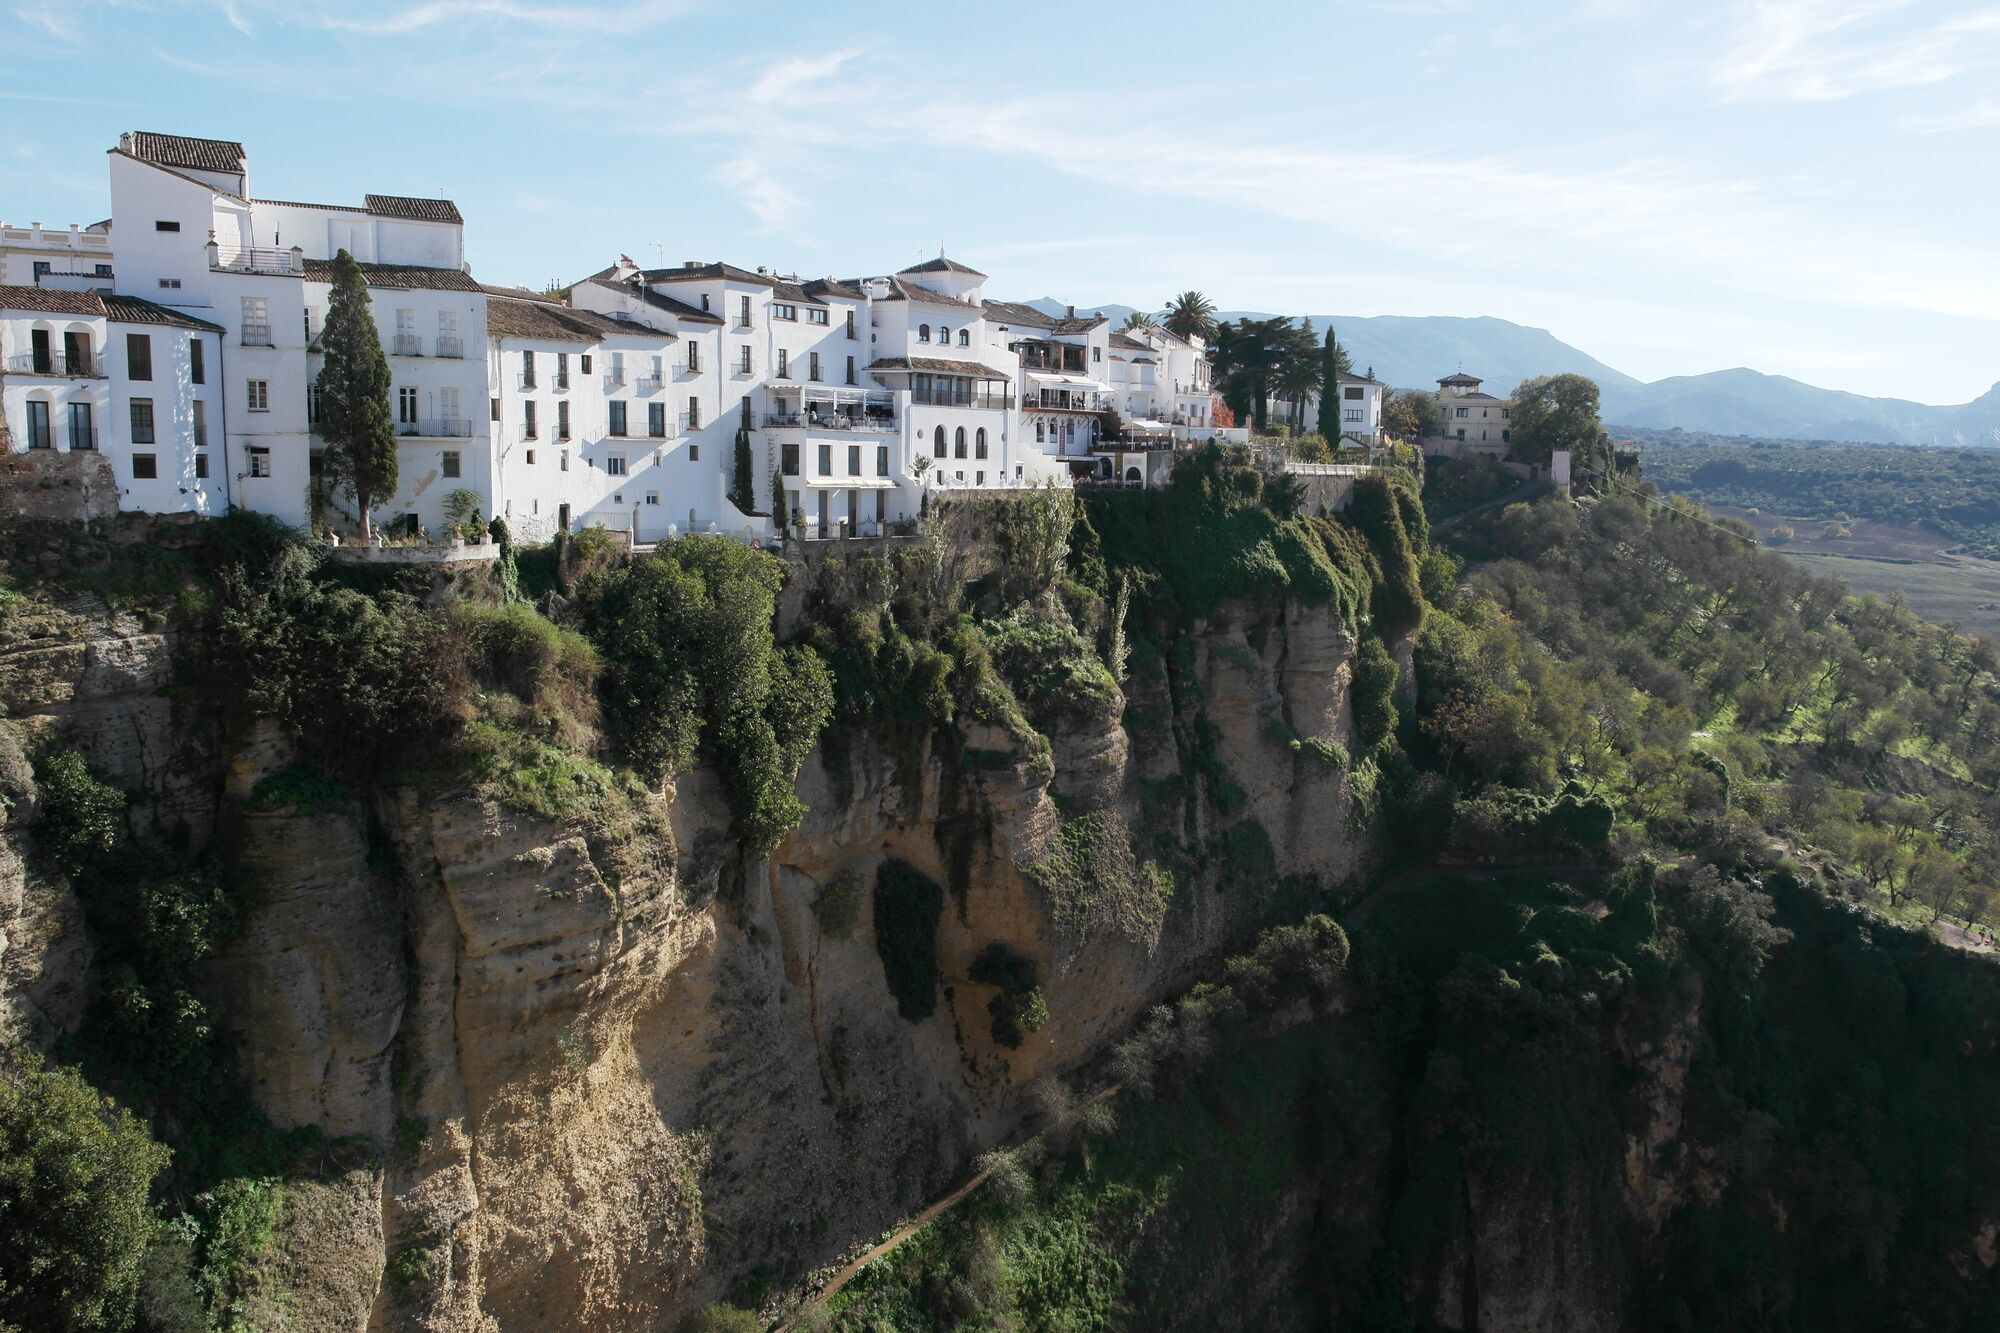 Rock cities of Europe: how does living on the edge of a precipice feel like